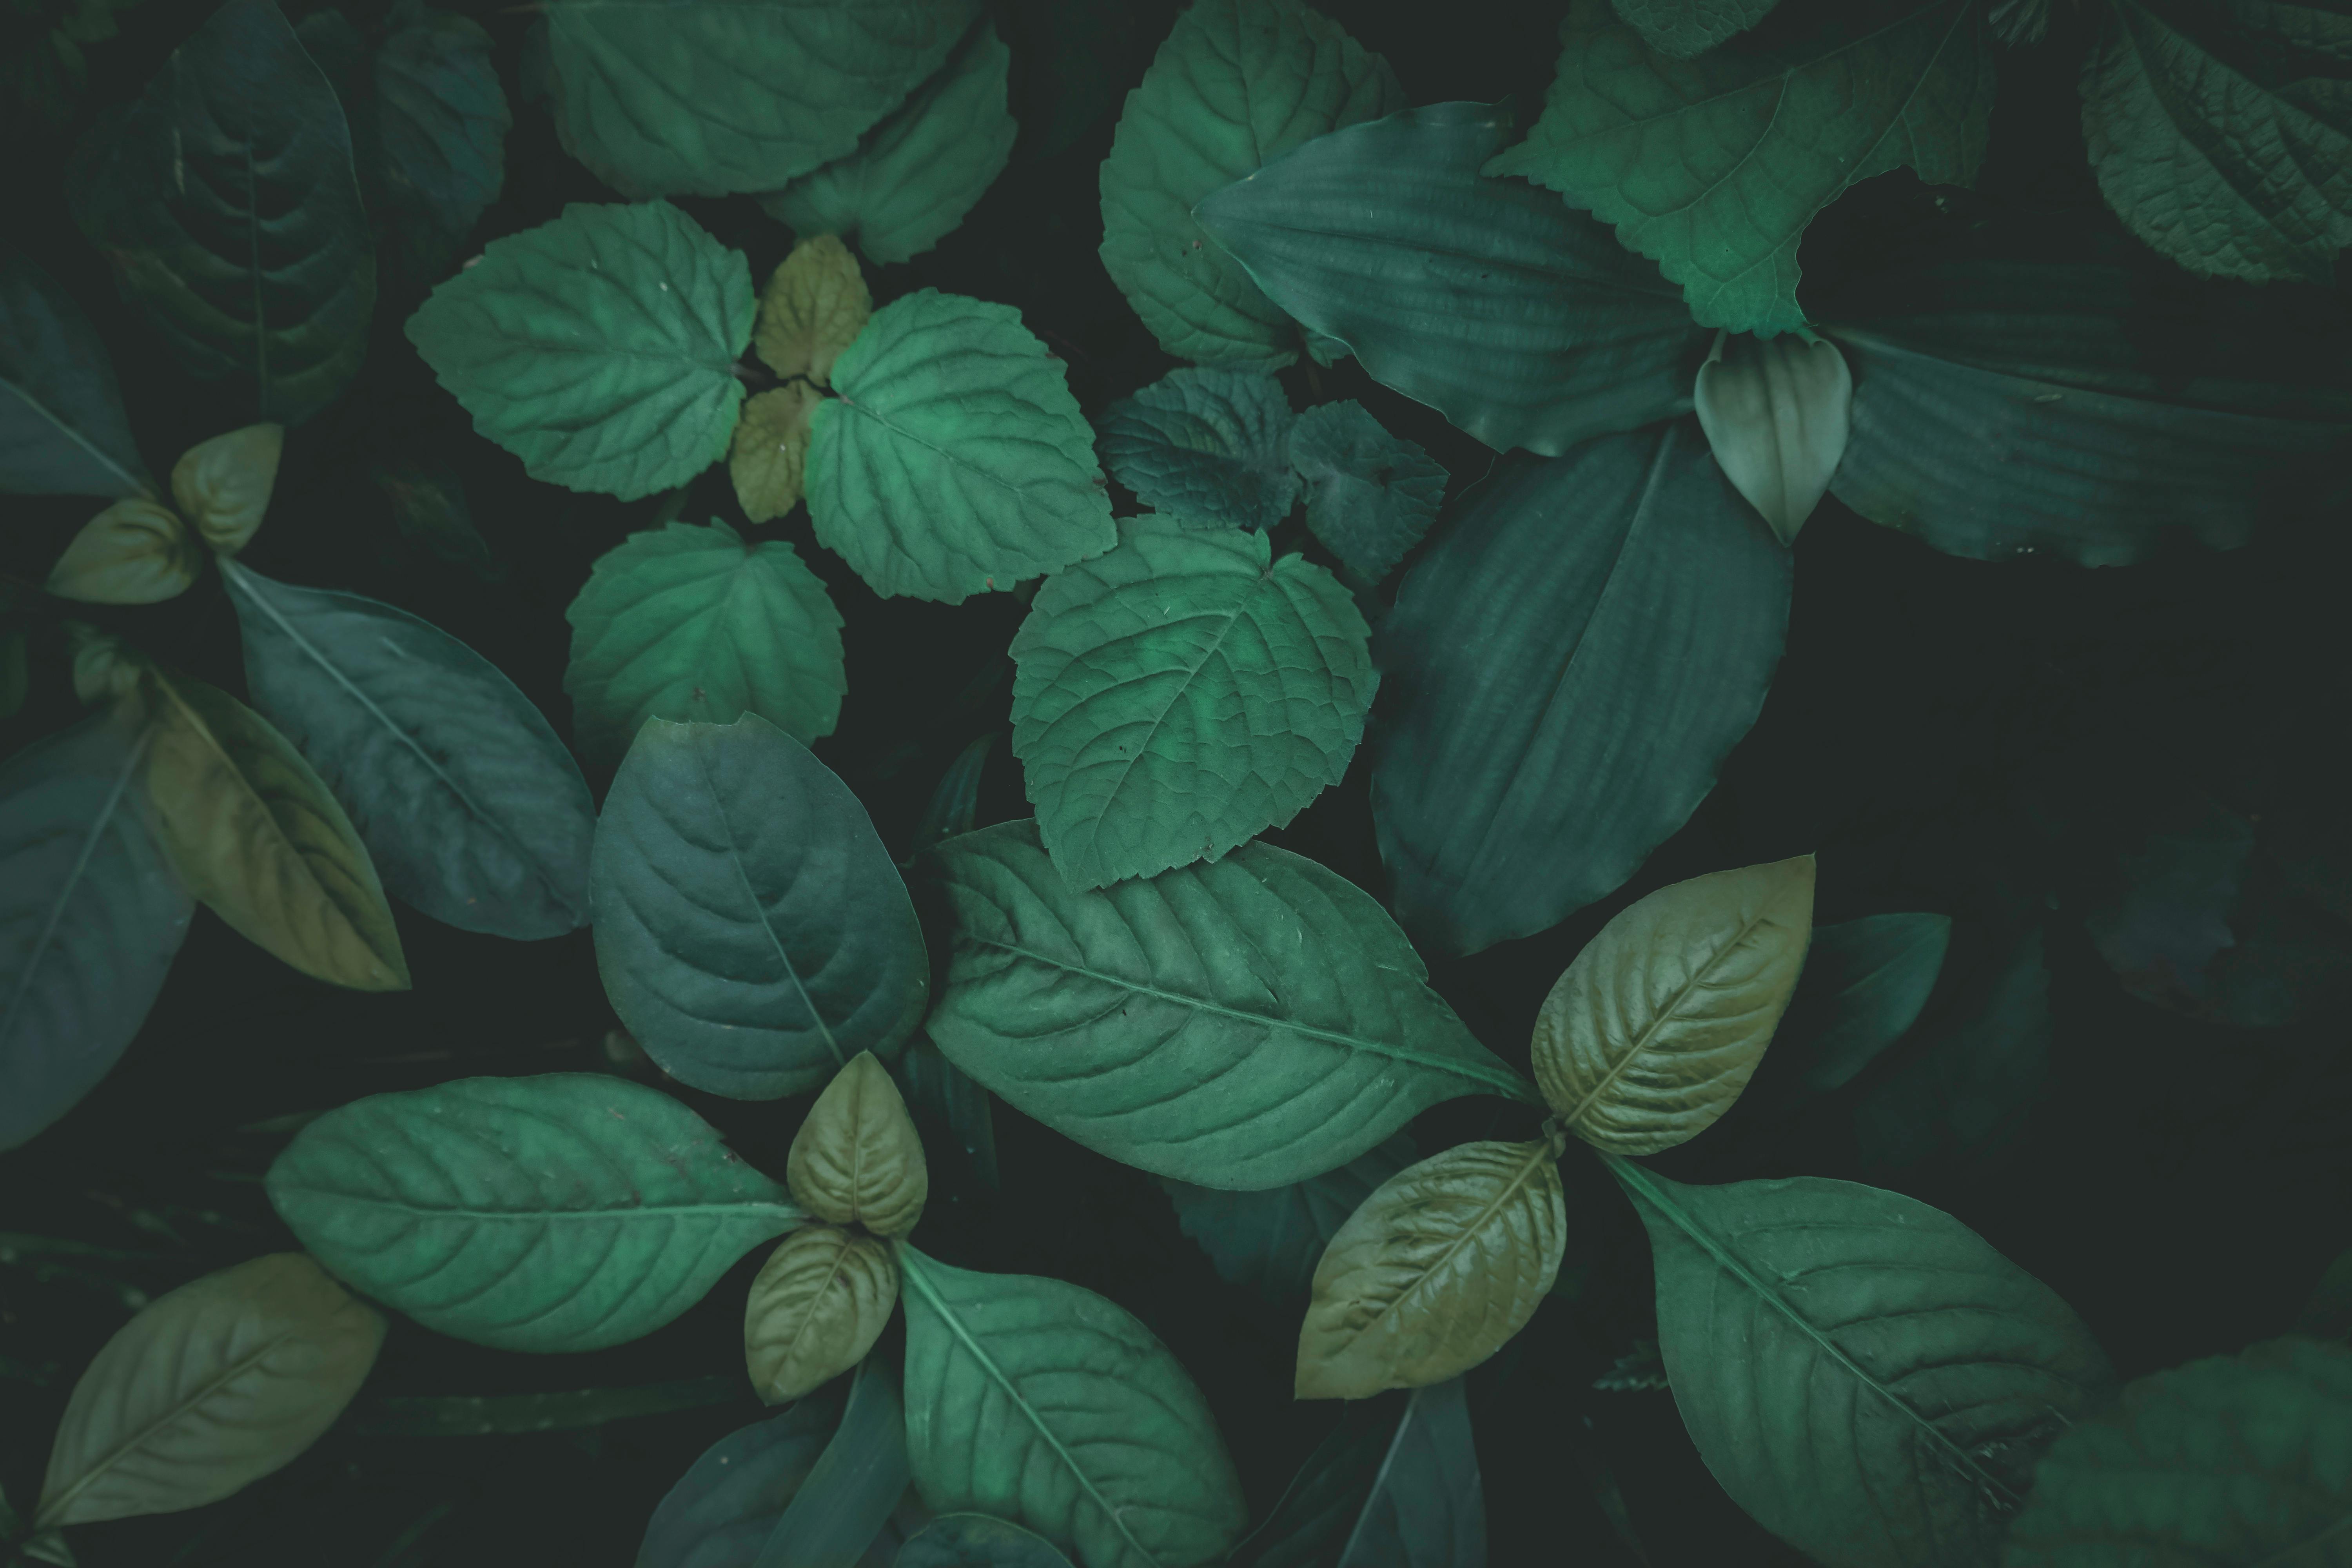 Green Leaves in Close Up Photography · Free Stock Photo